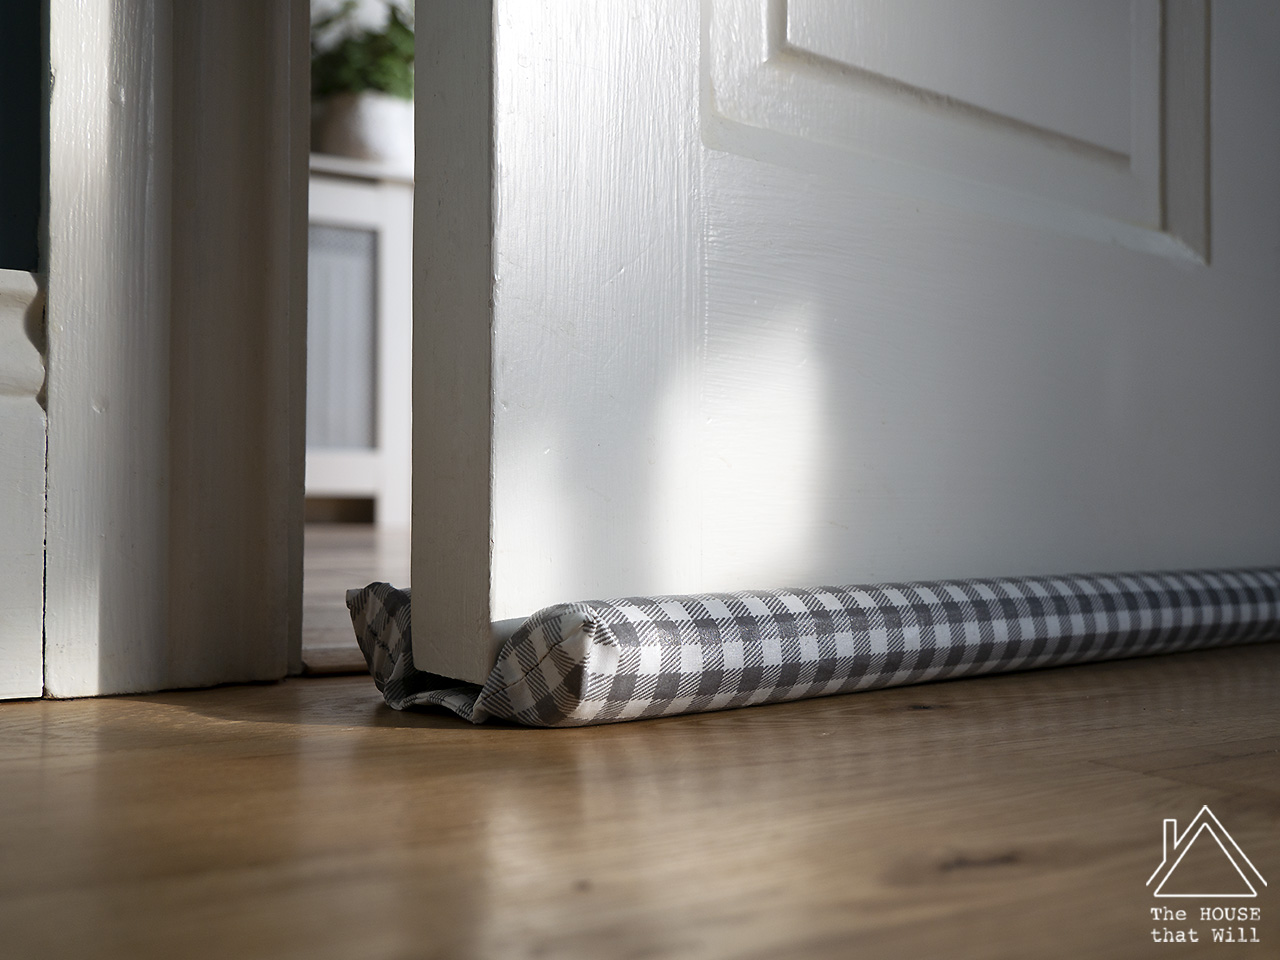 The House that Will | DIY Draught Excluder for Doors - eliminate drafts